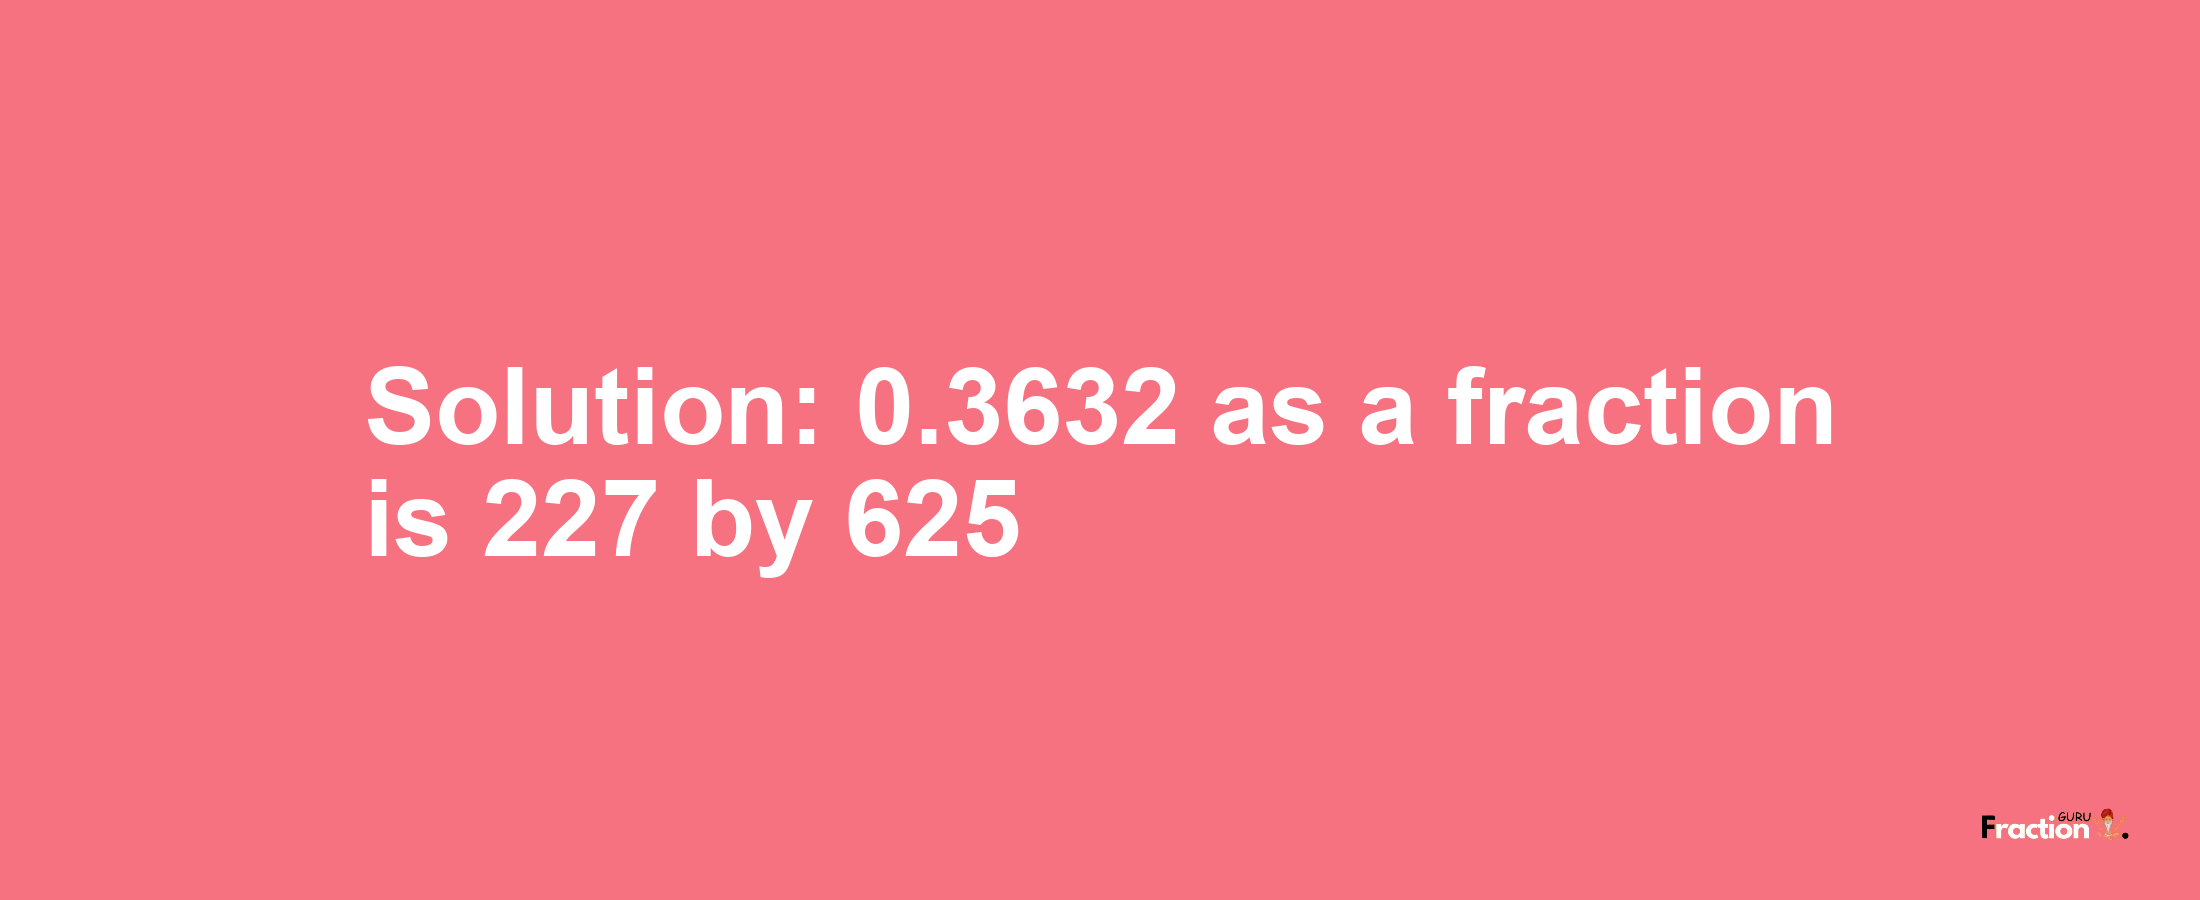 Solution:0.3632 as a fraction is 227/625